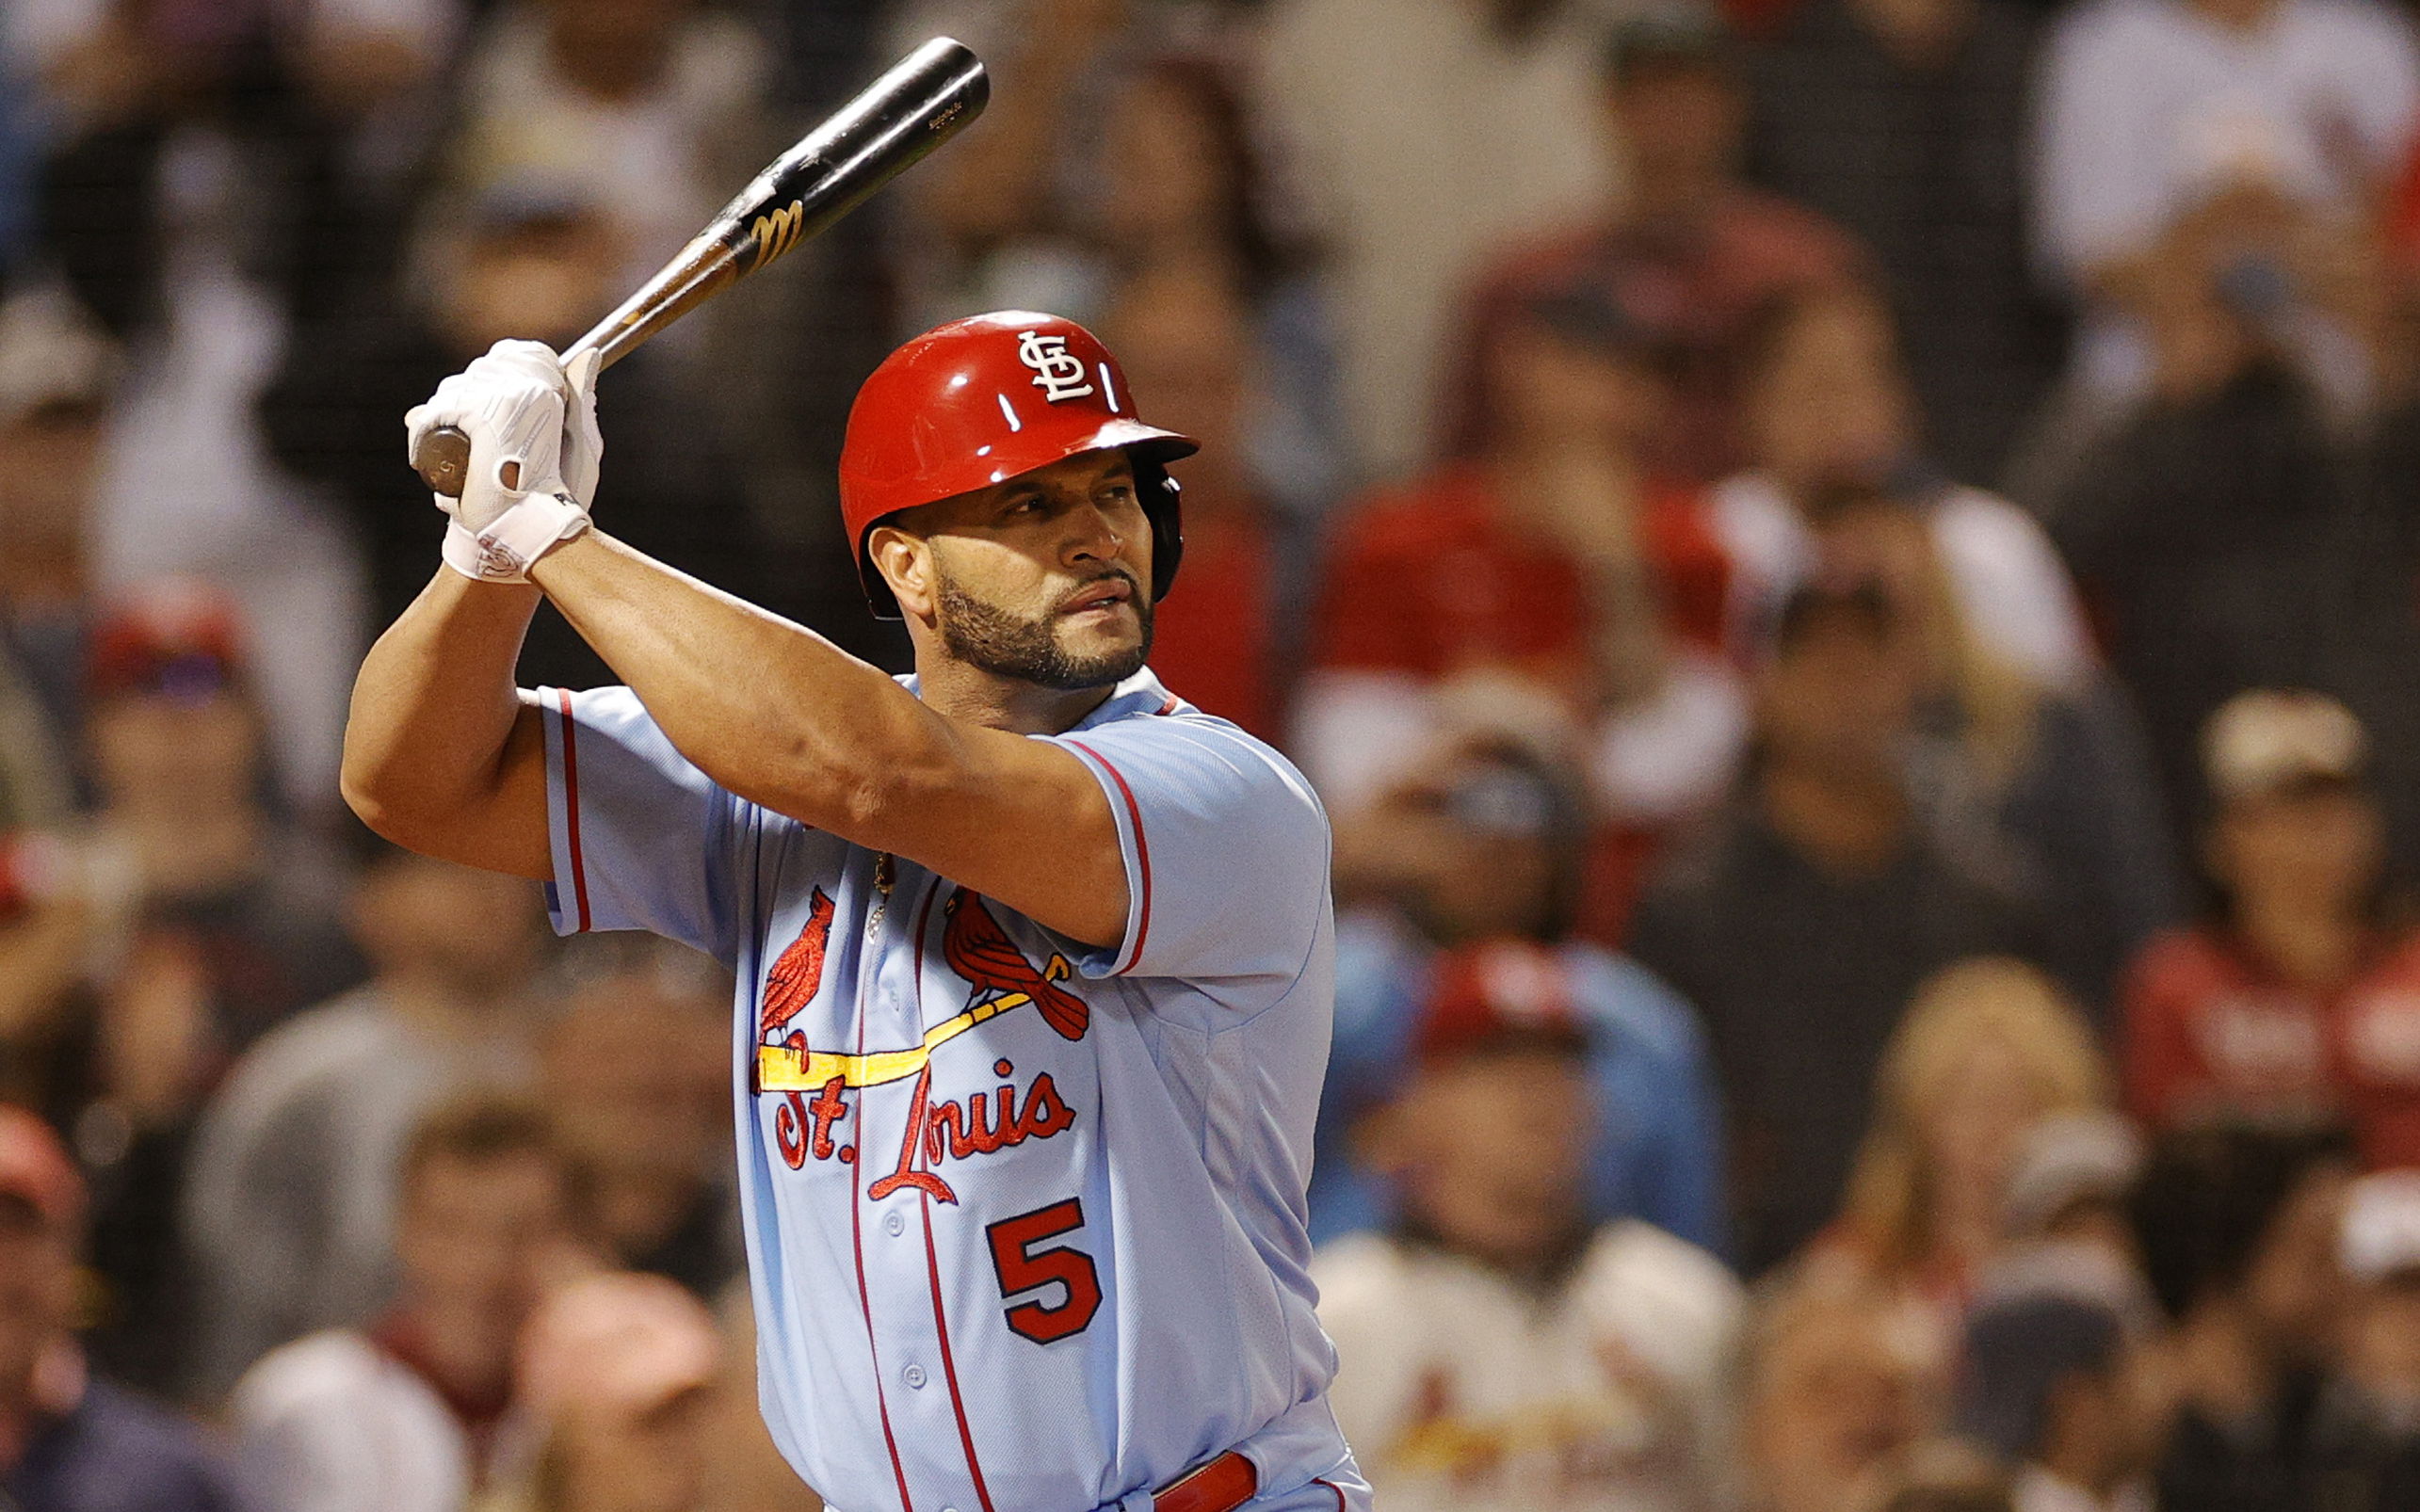 Albert Pujols competing in the Home Run Derby in his final season is going  to be a gift from the baseball gods, This is the Loop